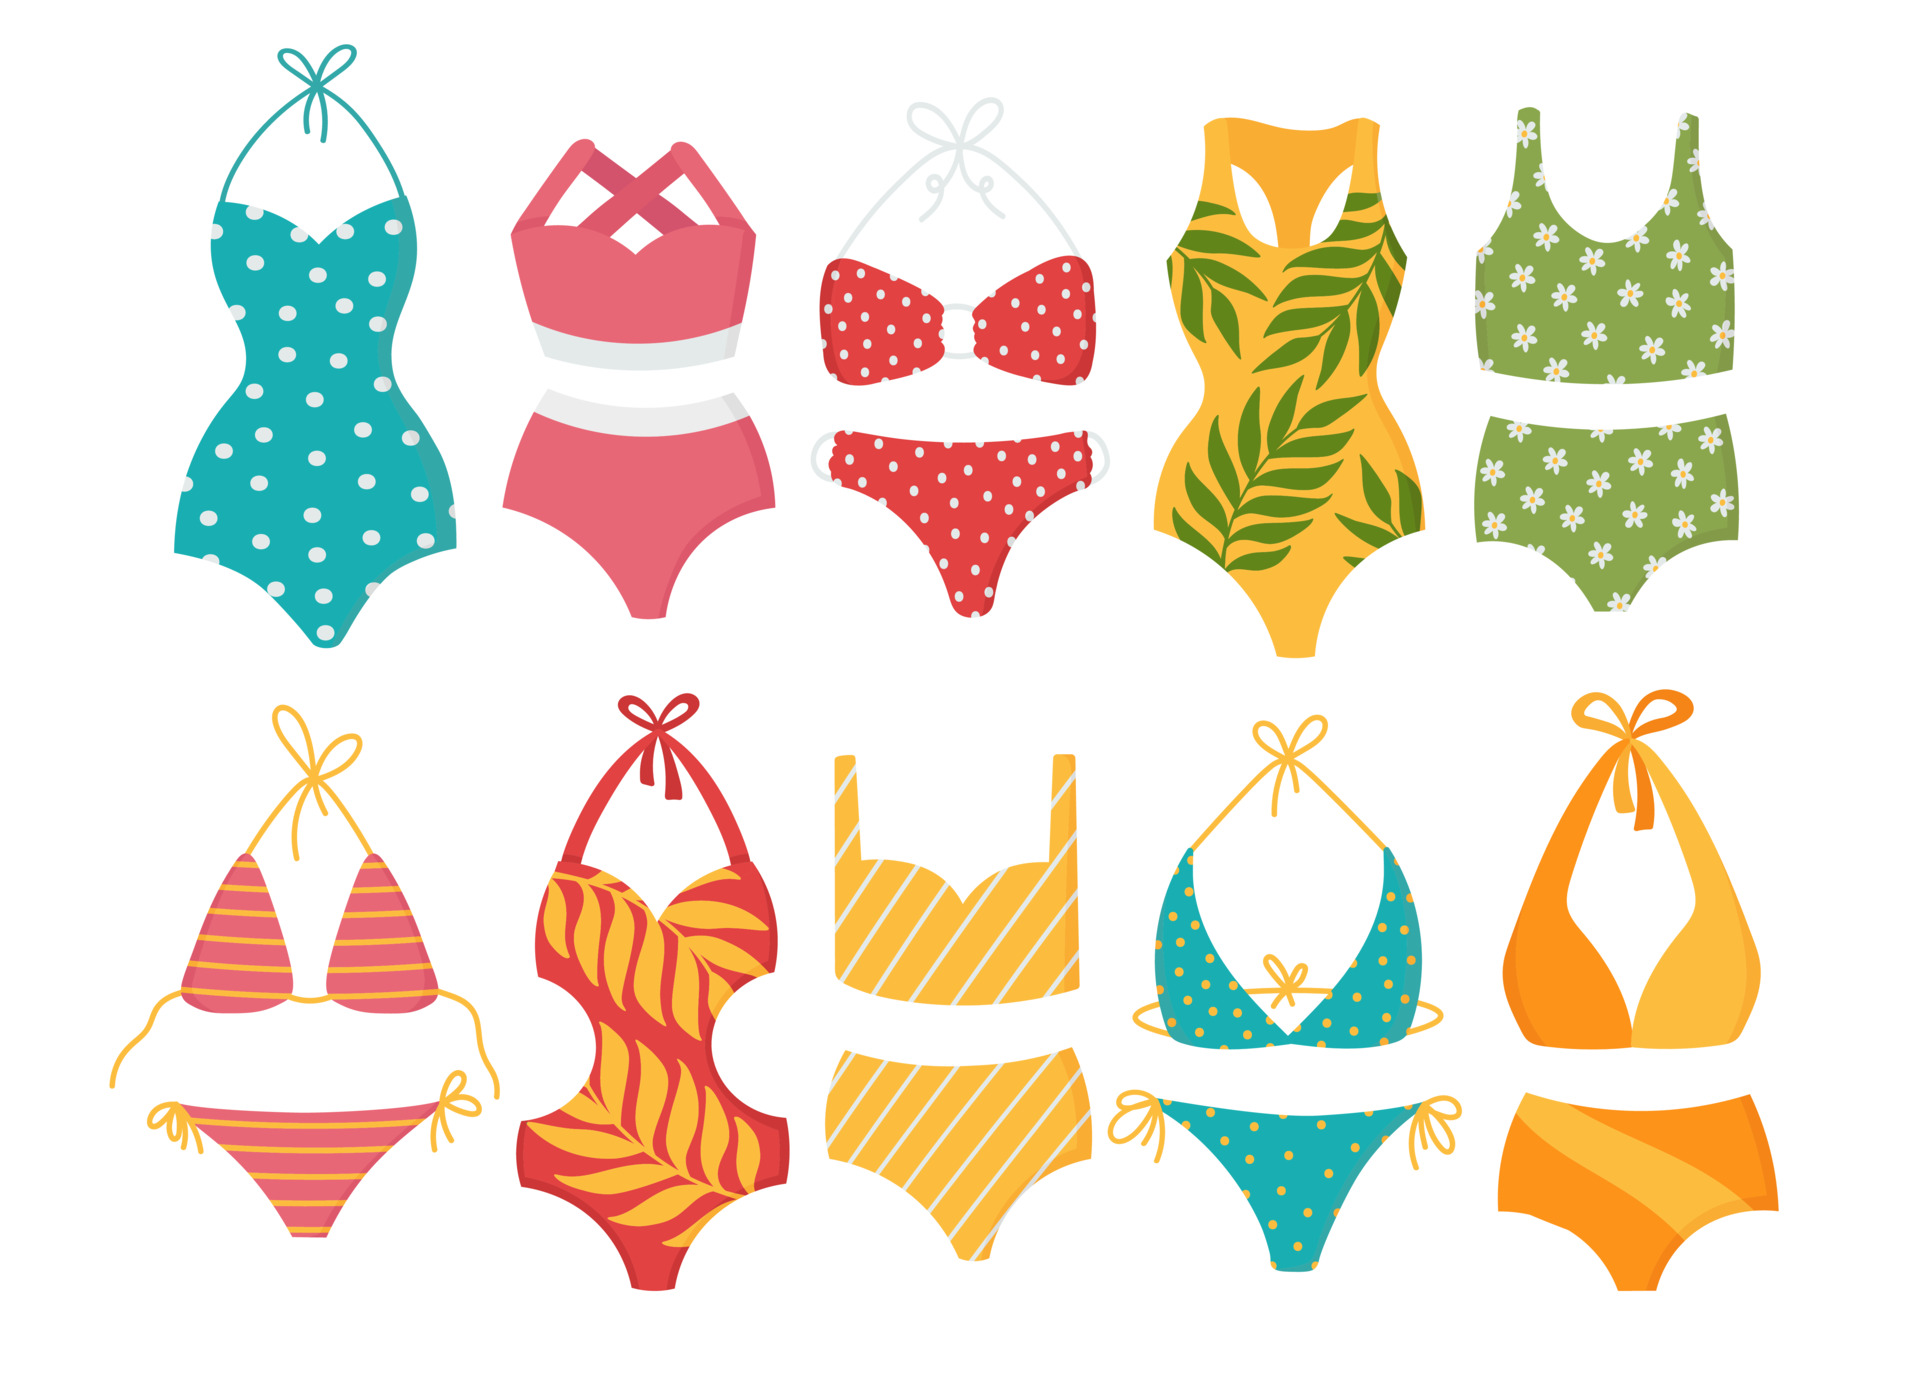 The Evolution of Swimwear: A Look at the History and Advancements in Competitive Swim Gear